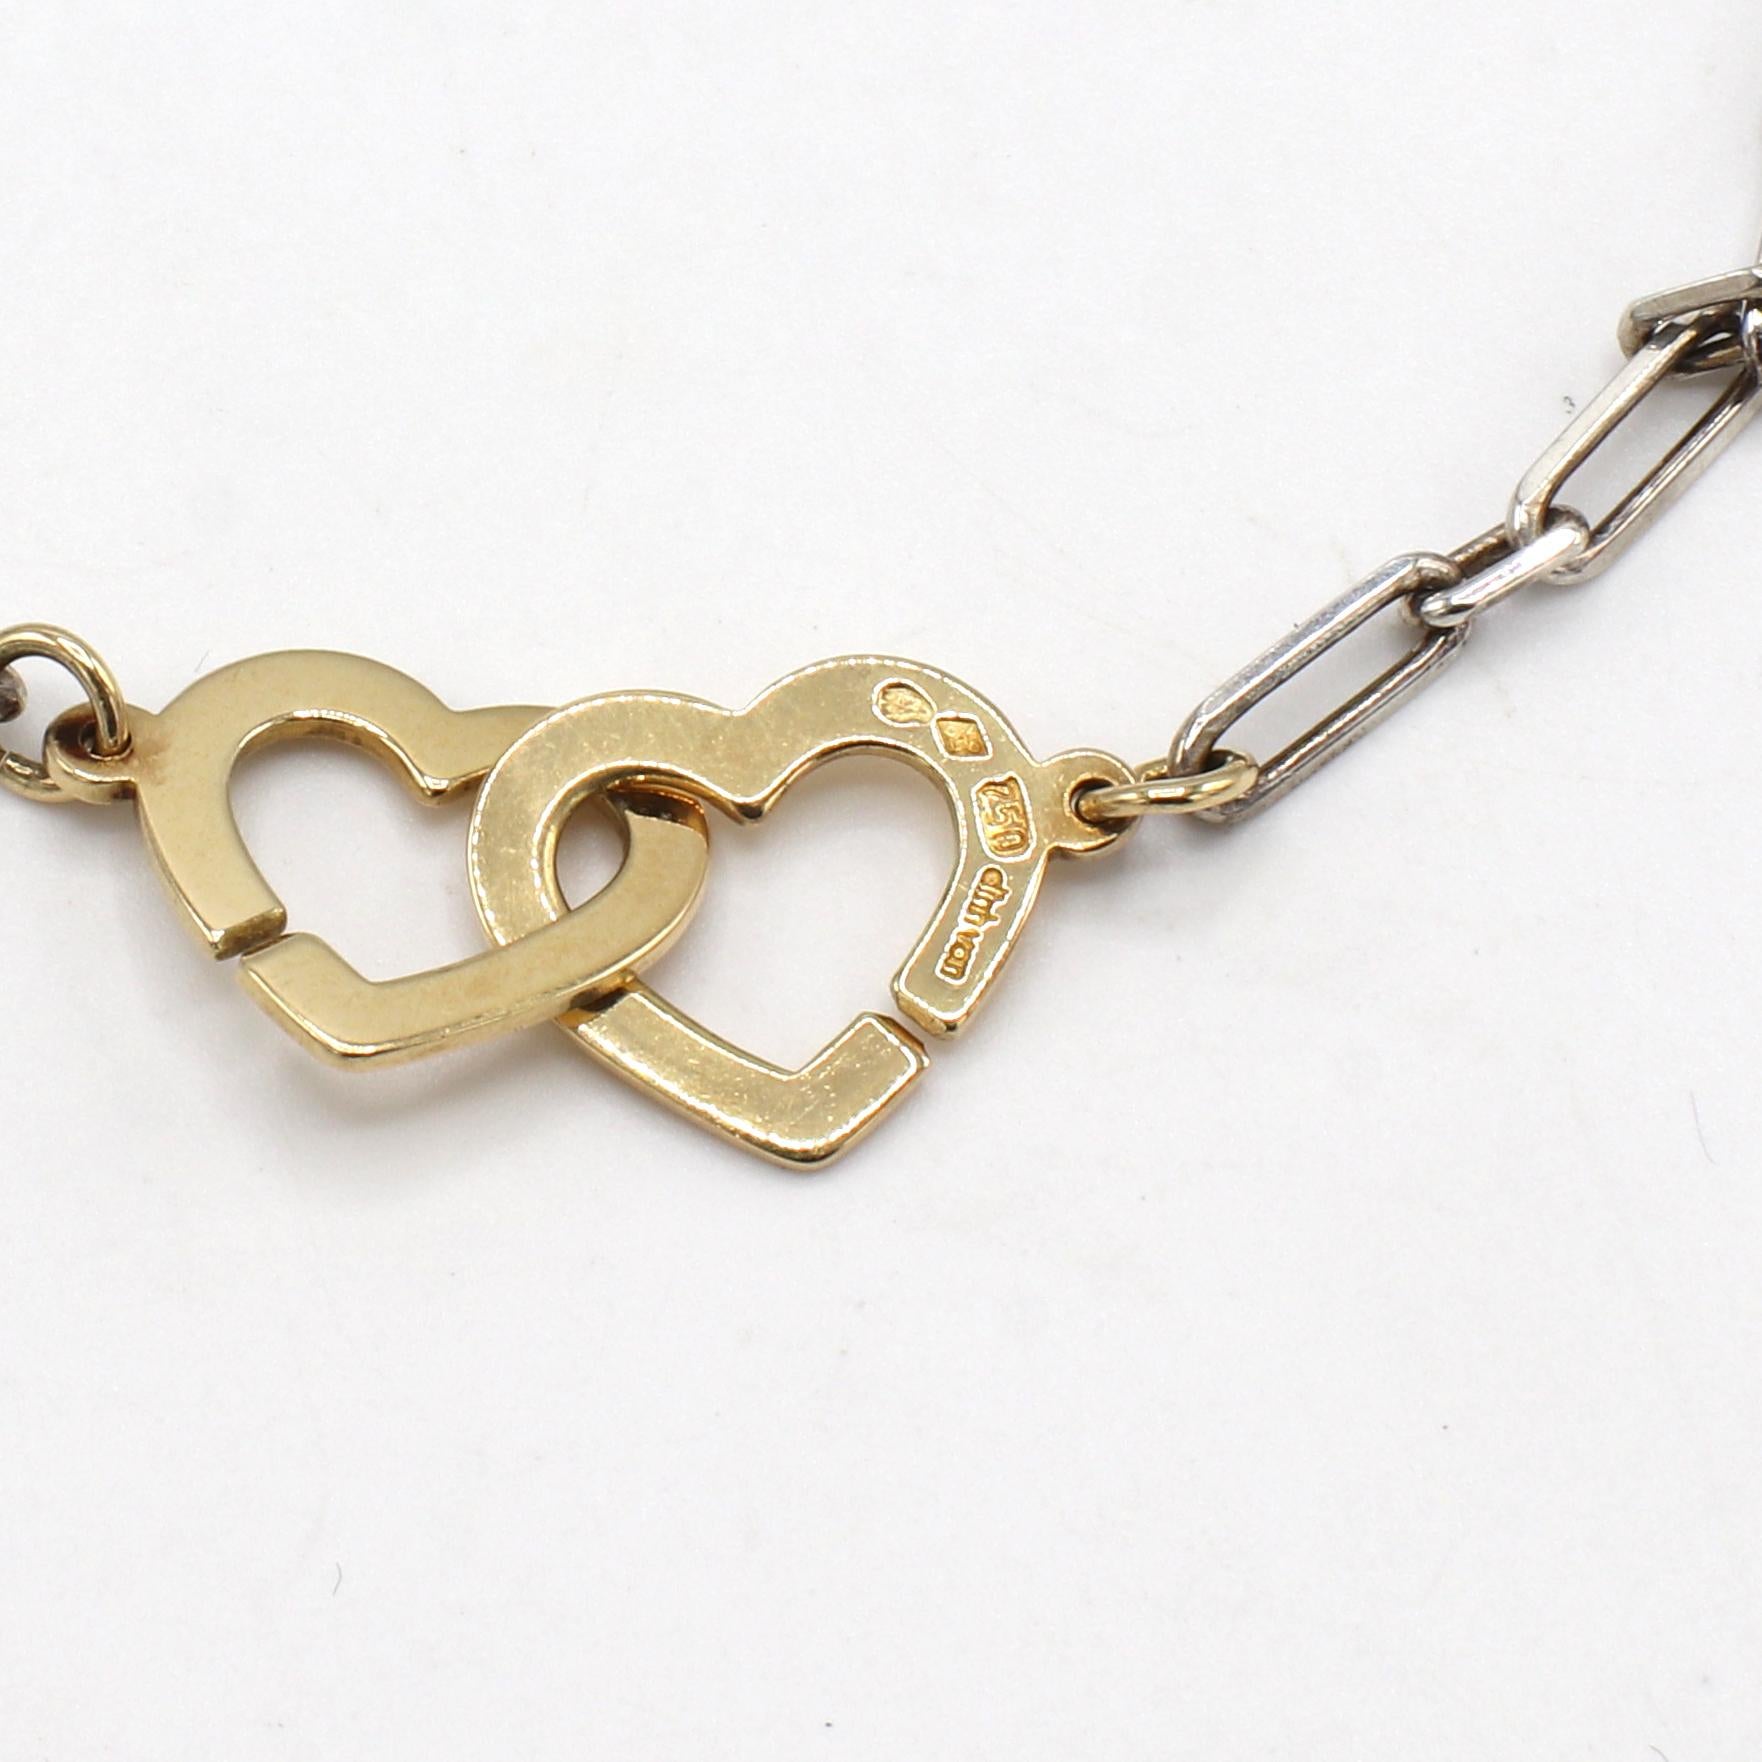 Dinh Van 18K Gold & Sterling Silver Double Heart Chain Link Bracelet

Metal: 18k yellow gold & sterling silver 
Weight: 6.35 grams
Length: 8.25